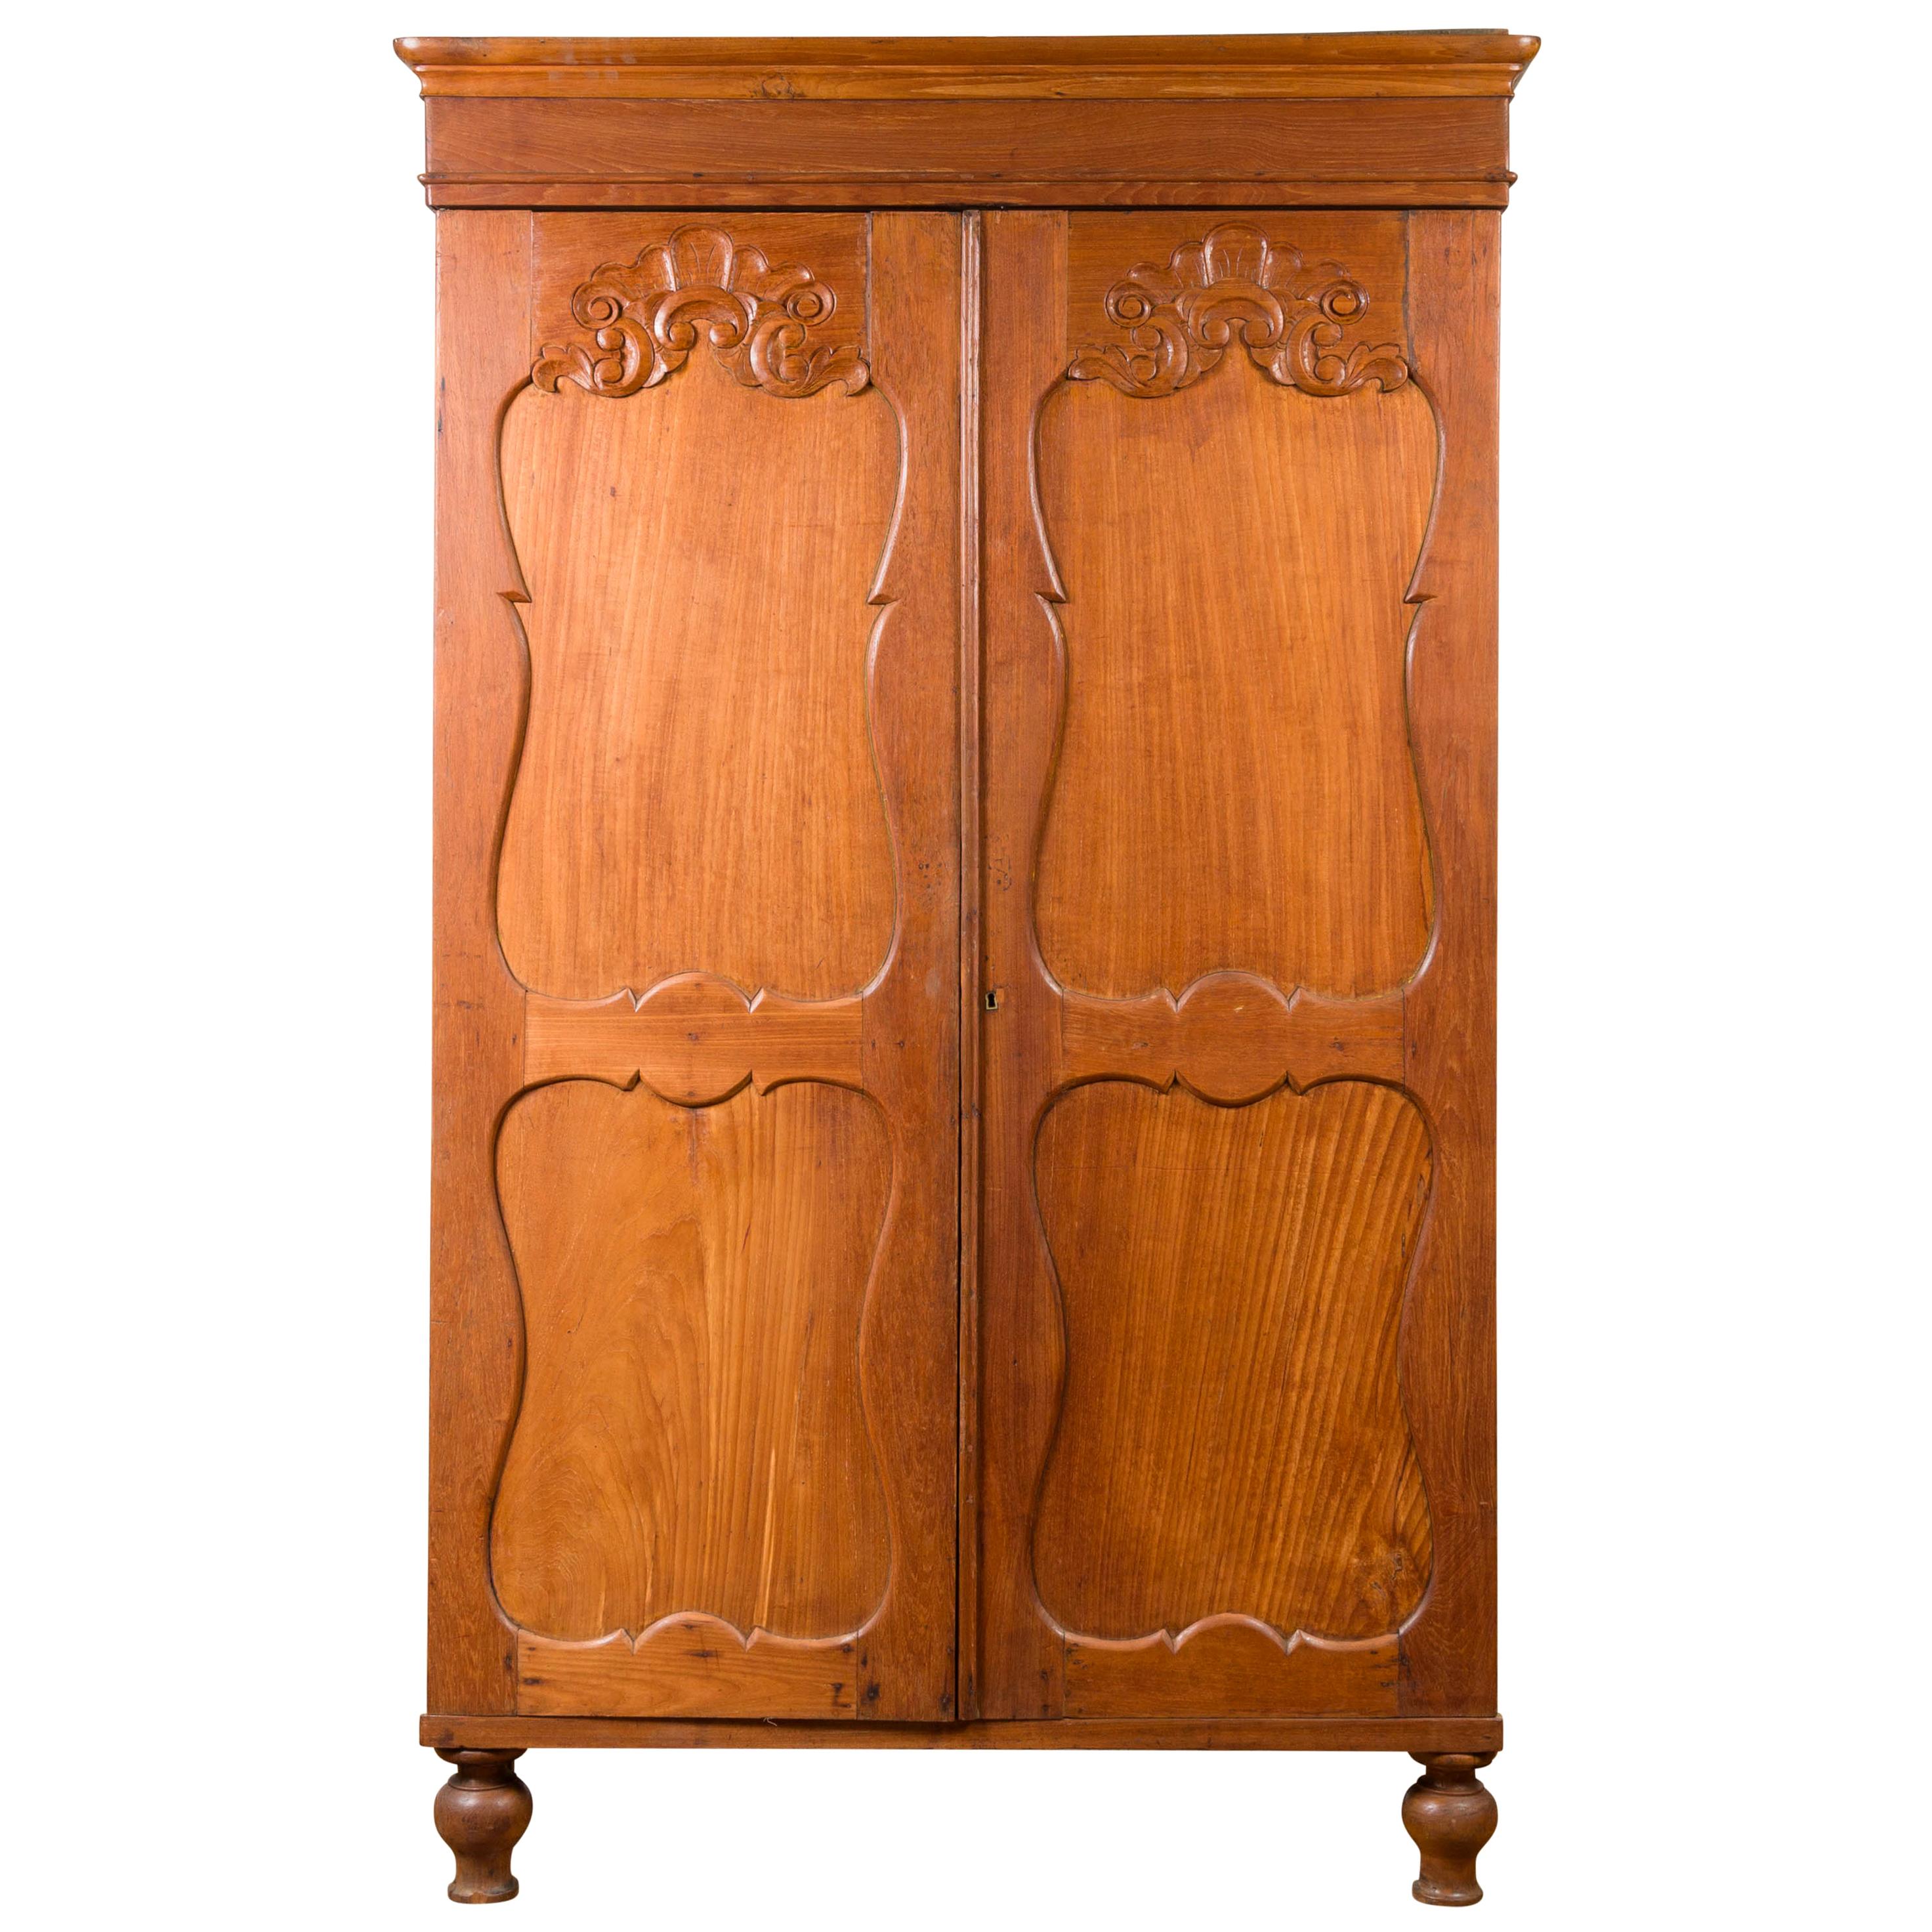 Dutch Colonial 19th Century Teak Wood Cabinet with Carved Panels and Shelves